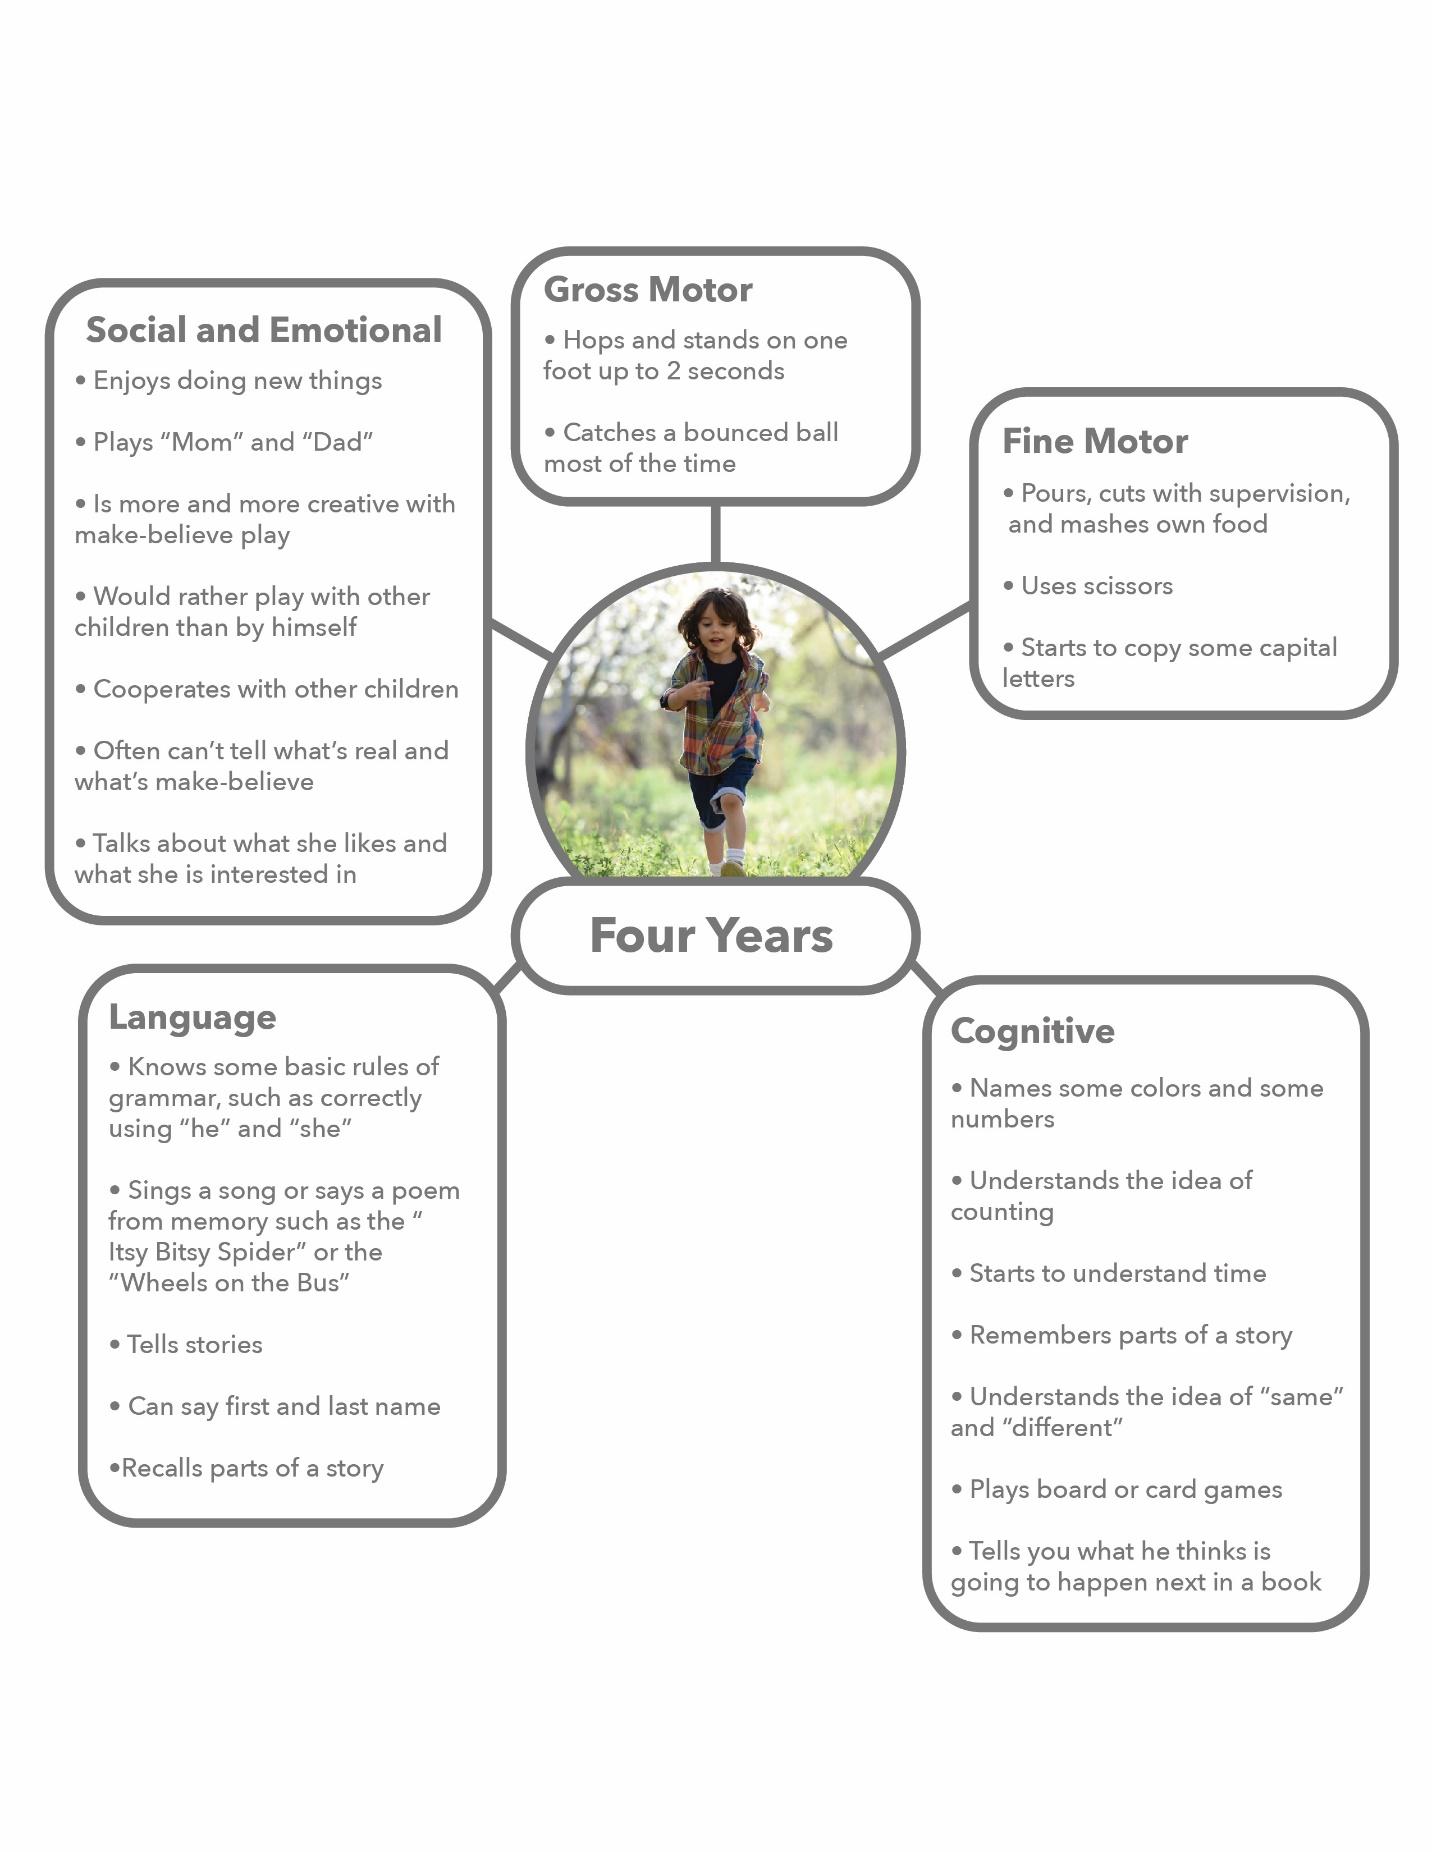 A graphic showing the develomental milestones of a four-year-old